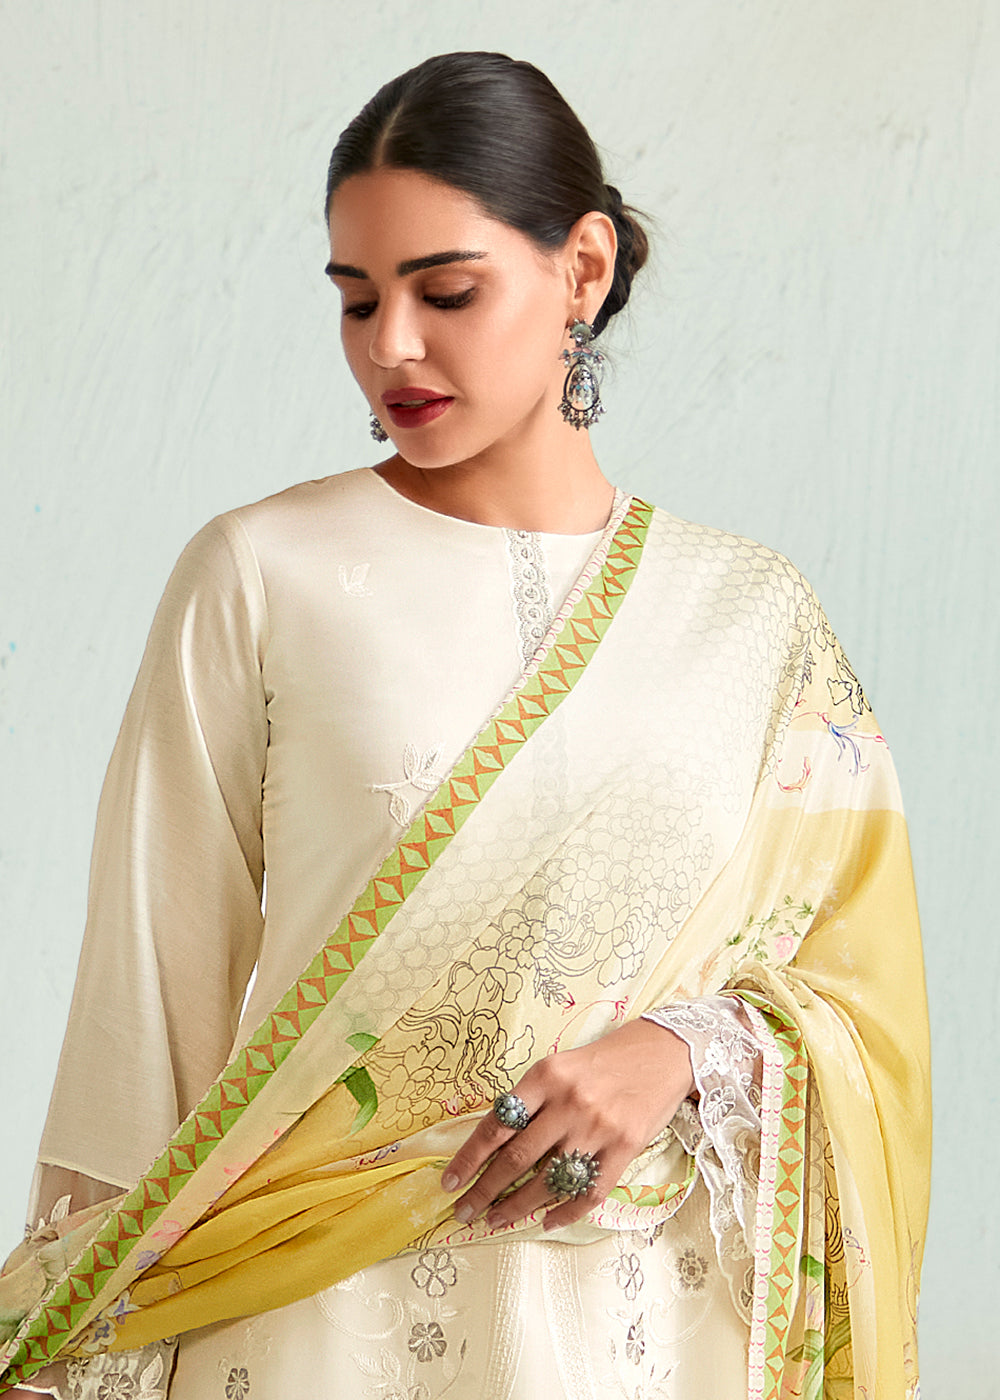 Buy Now Off White Pure Muslin Resham Embroidered Salwar Suit Online in USA, UK, Canada, Germany, Australia & Worldwide at Empress Clothing.